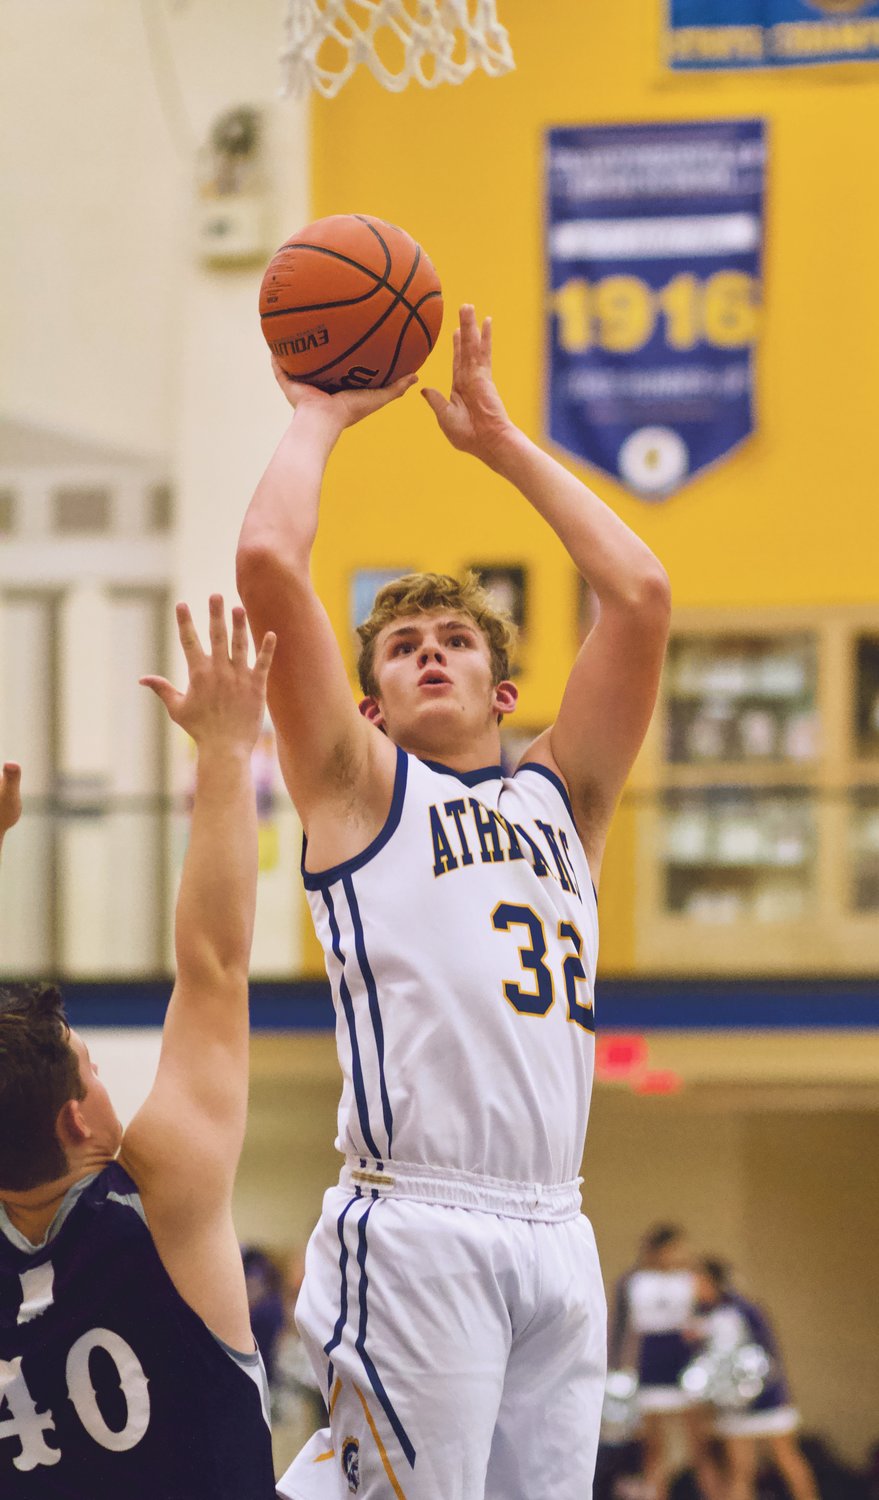 Crawfordsville's Nate Schroeter looks to score for the Athenians in a game last season.